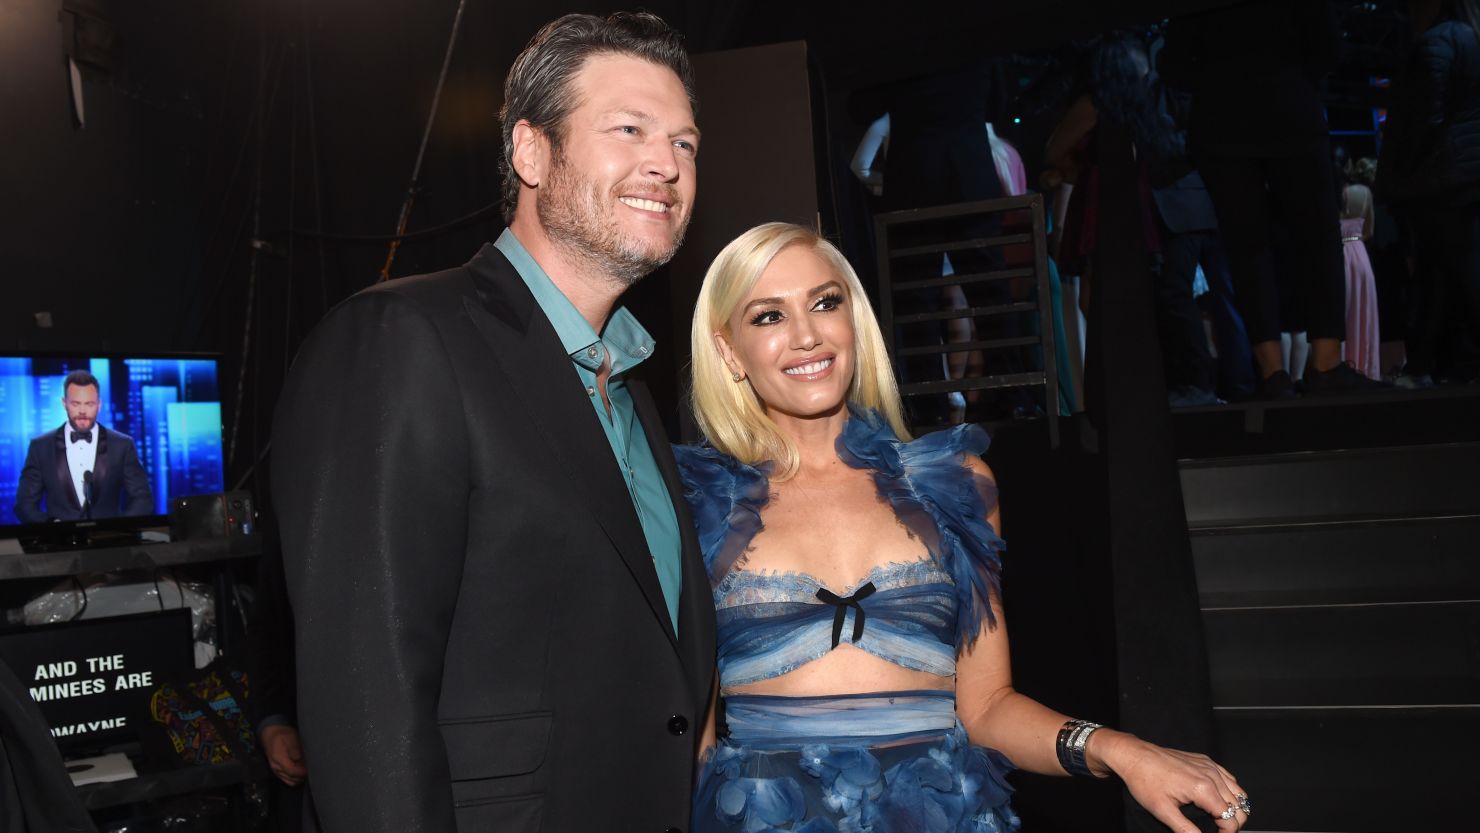 Blake Shelton and Gwen Stefani are coworkers on "The Voice" and dating. 